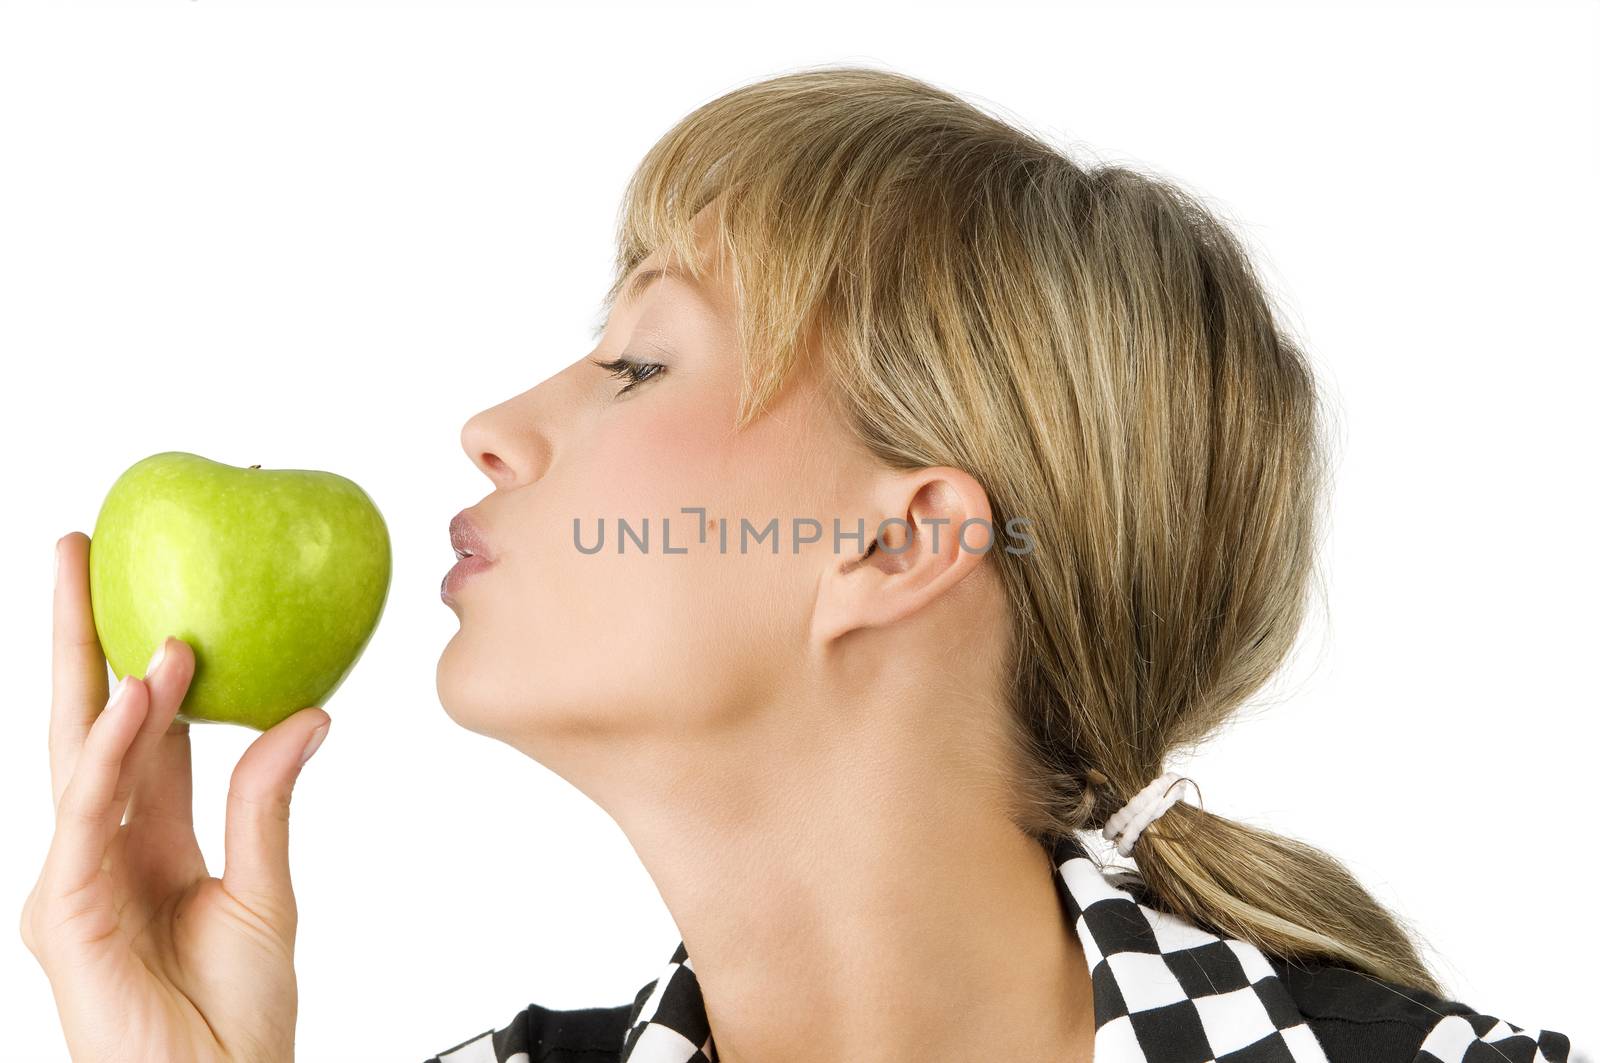 pretty blond girl kissing the green apple in her hand